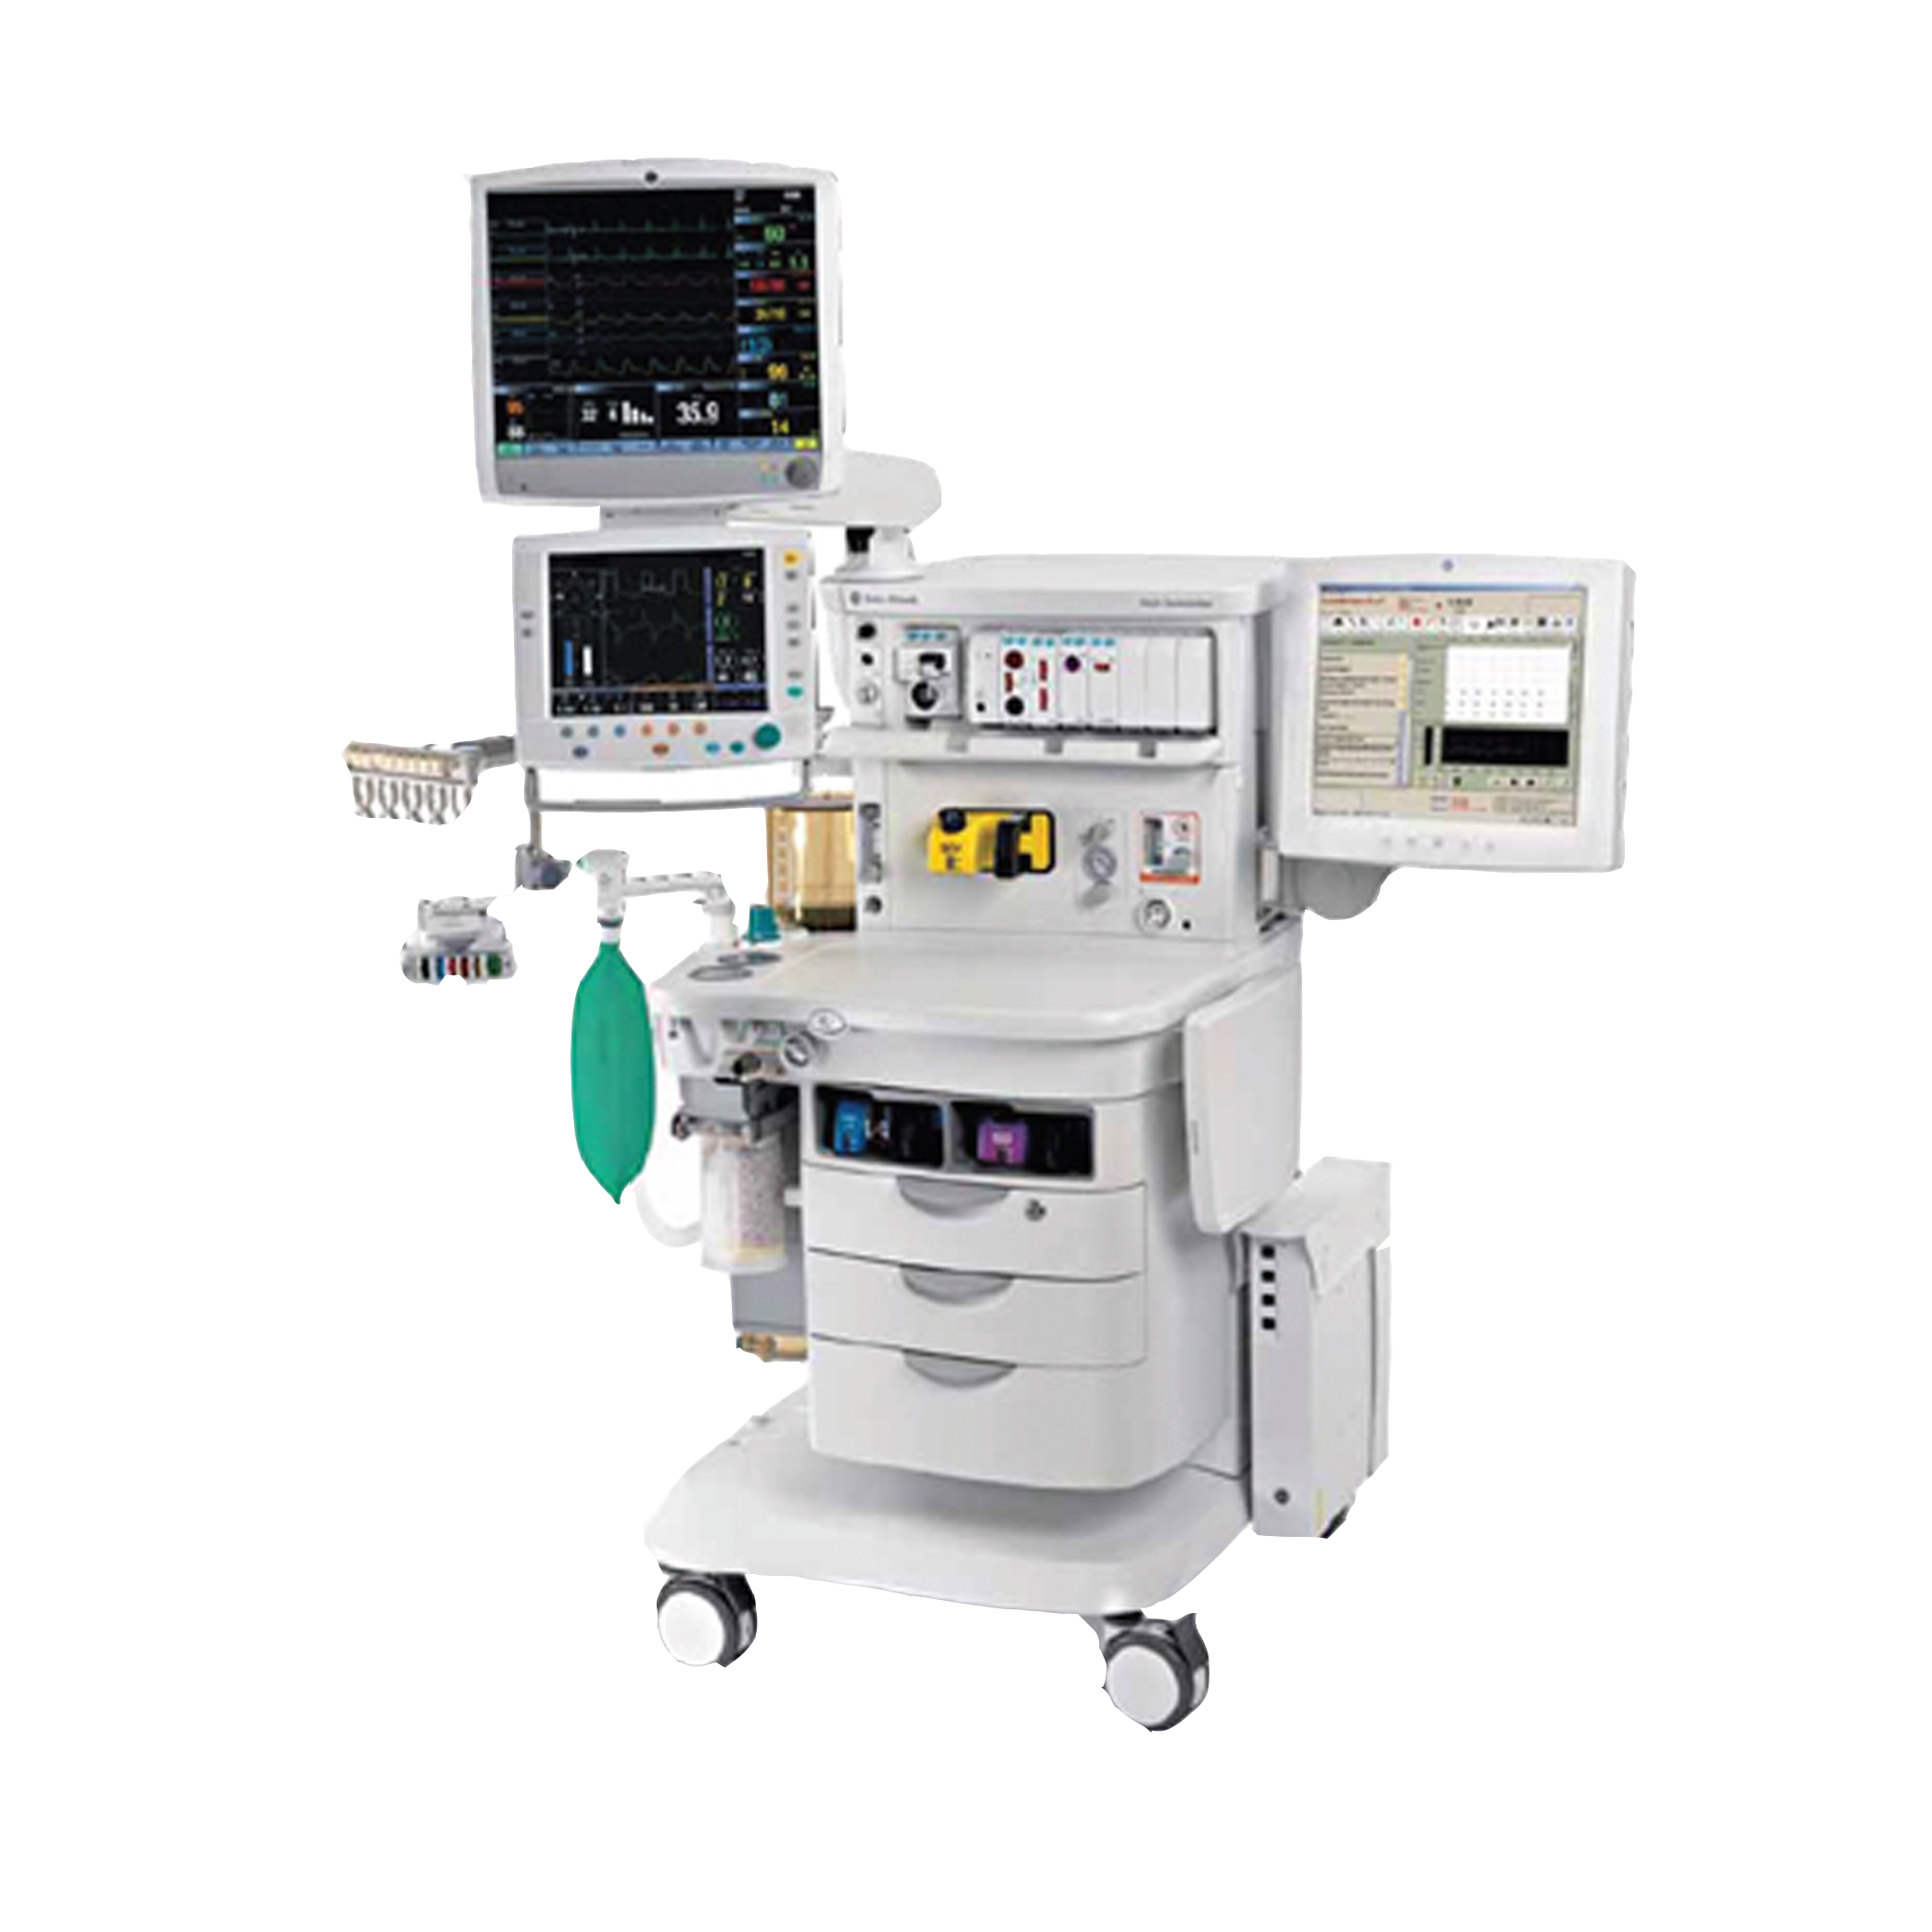 V.N.Medical Services, Anesthesia Machines In Chennai, Nitrous Oxide Cylinder In Chennai, Vacuum Pump In Chennai, Medical Oxygen In Chennai, Central Gas Pipeline System In Chennai, Oxygen Manifold In Chennai
Nitrous Oxide Manifold In Chennai

